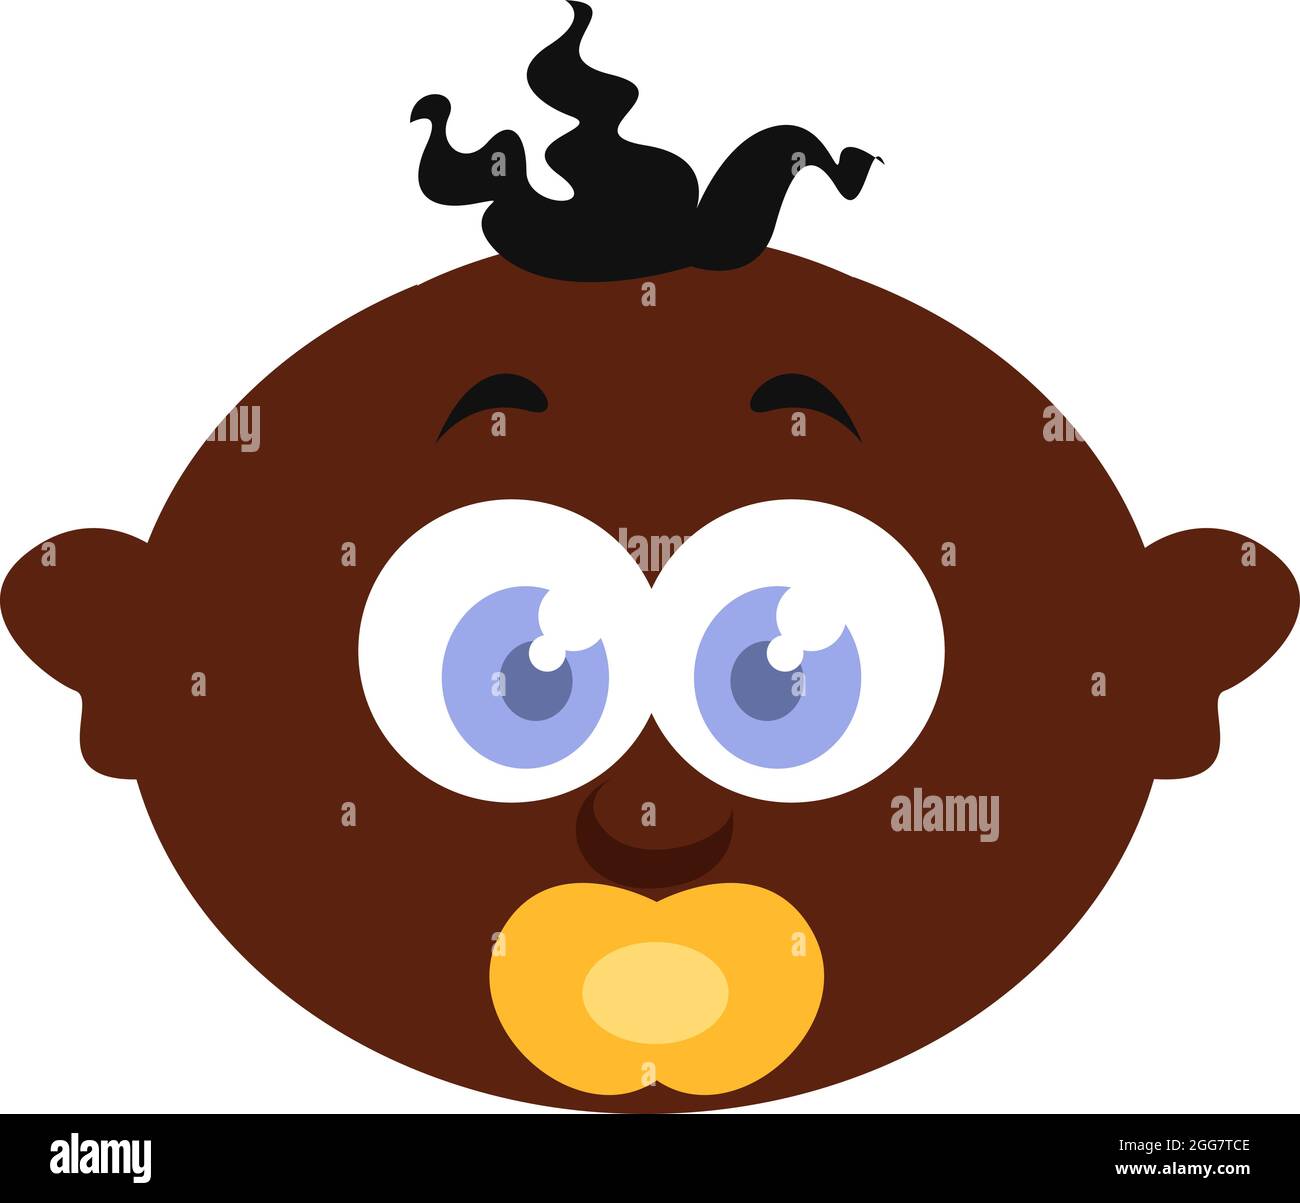 Curly haired baby wtih bright blue eyes, illustration, on a white background. Stock Vector